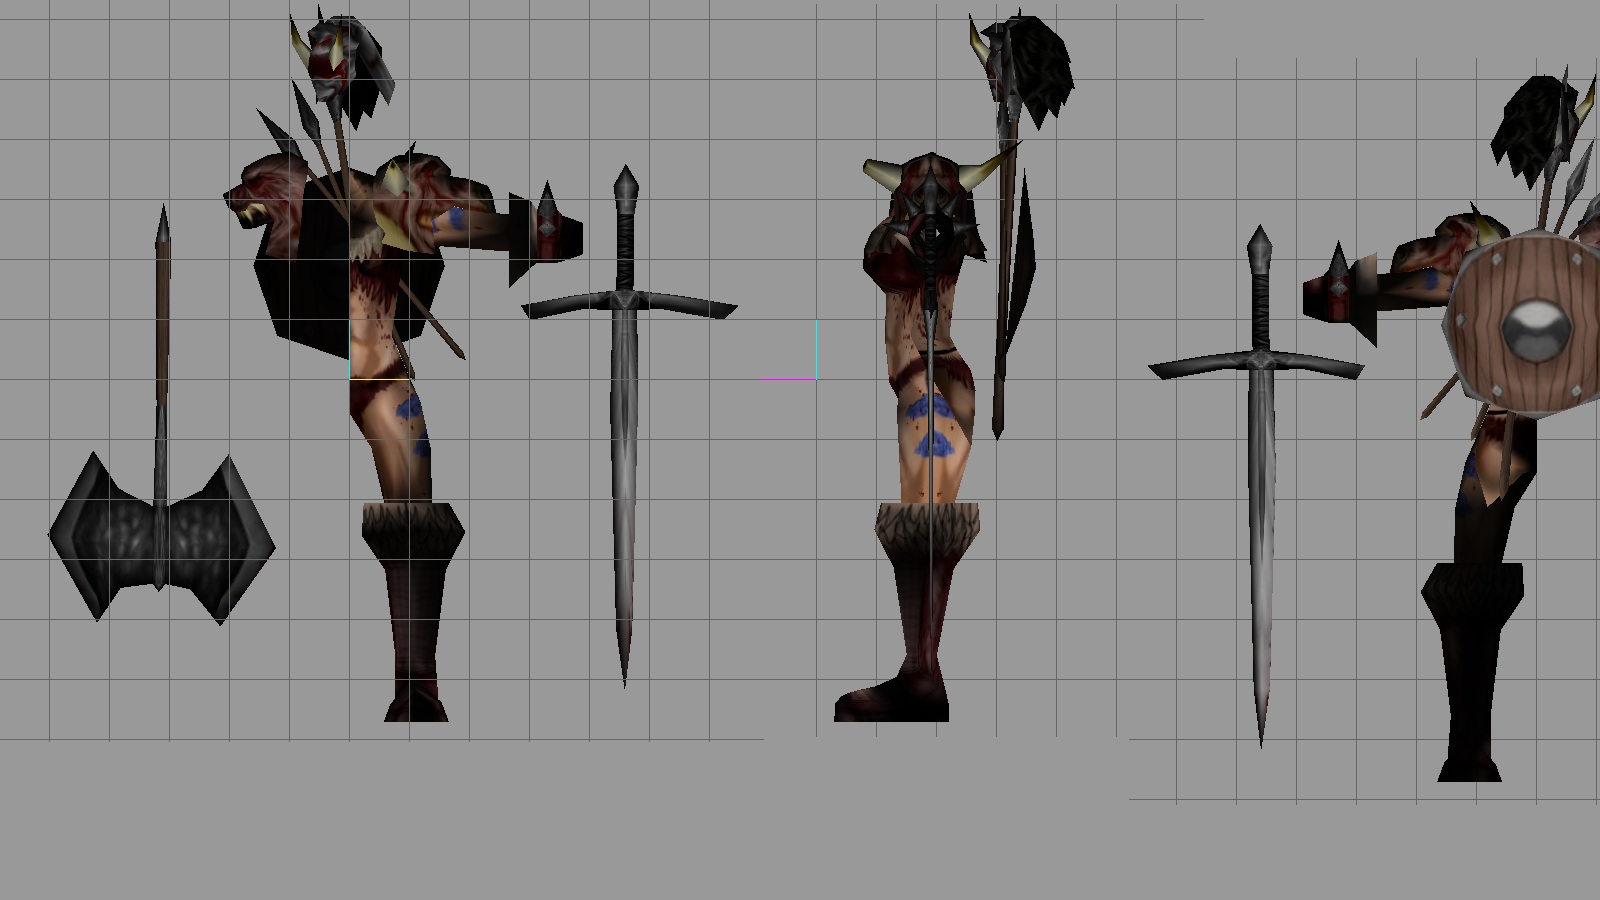 Barbarianess - the current progress of the model that 67chrome and I are working on